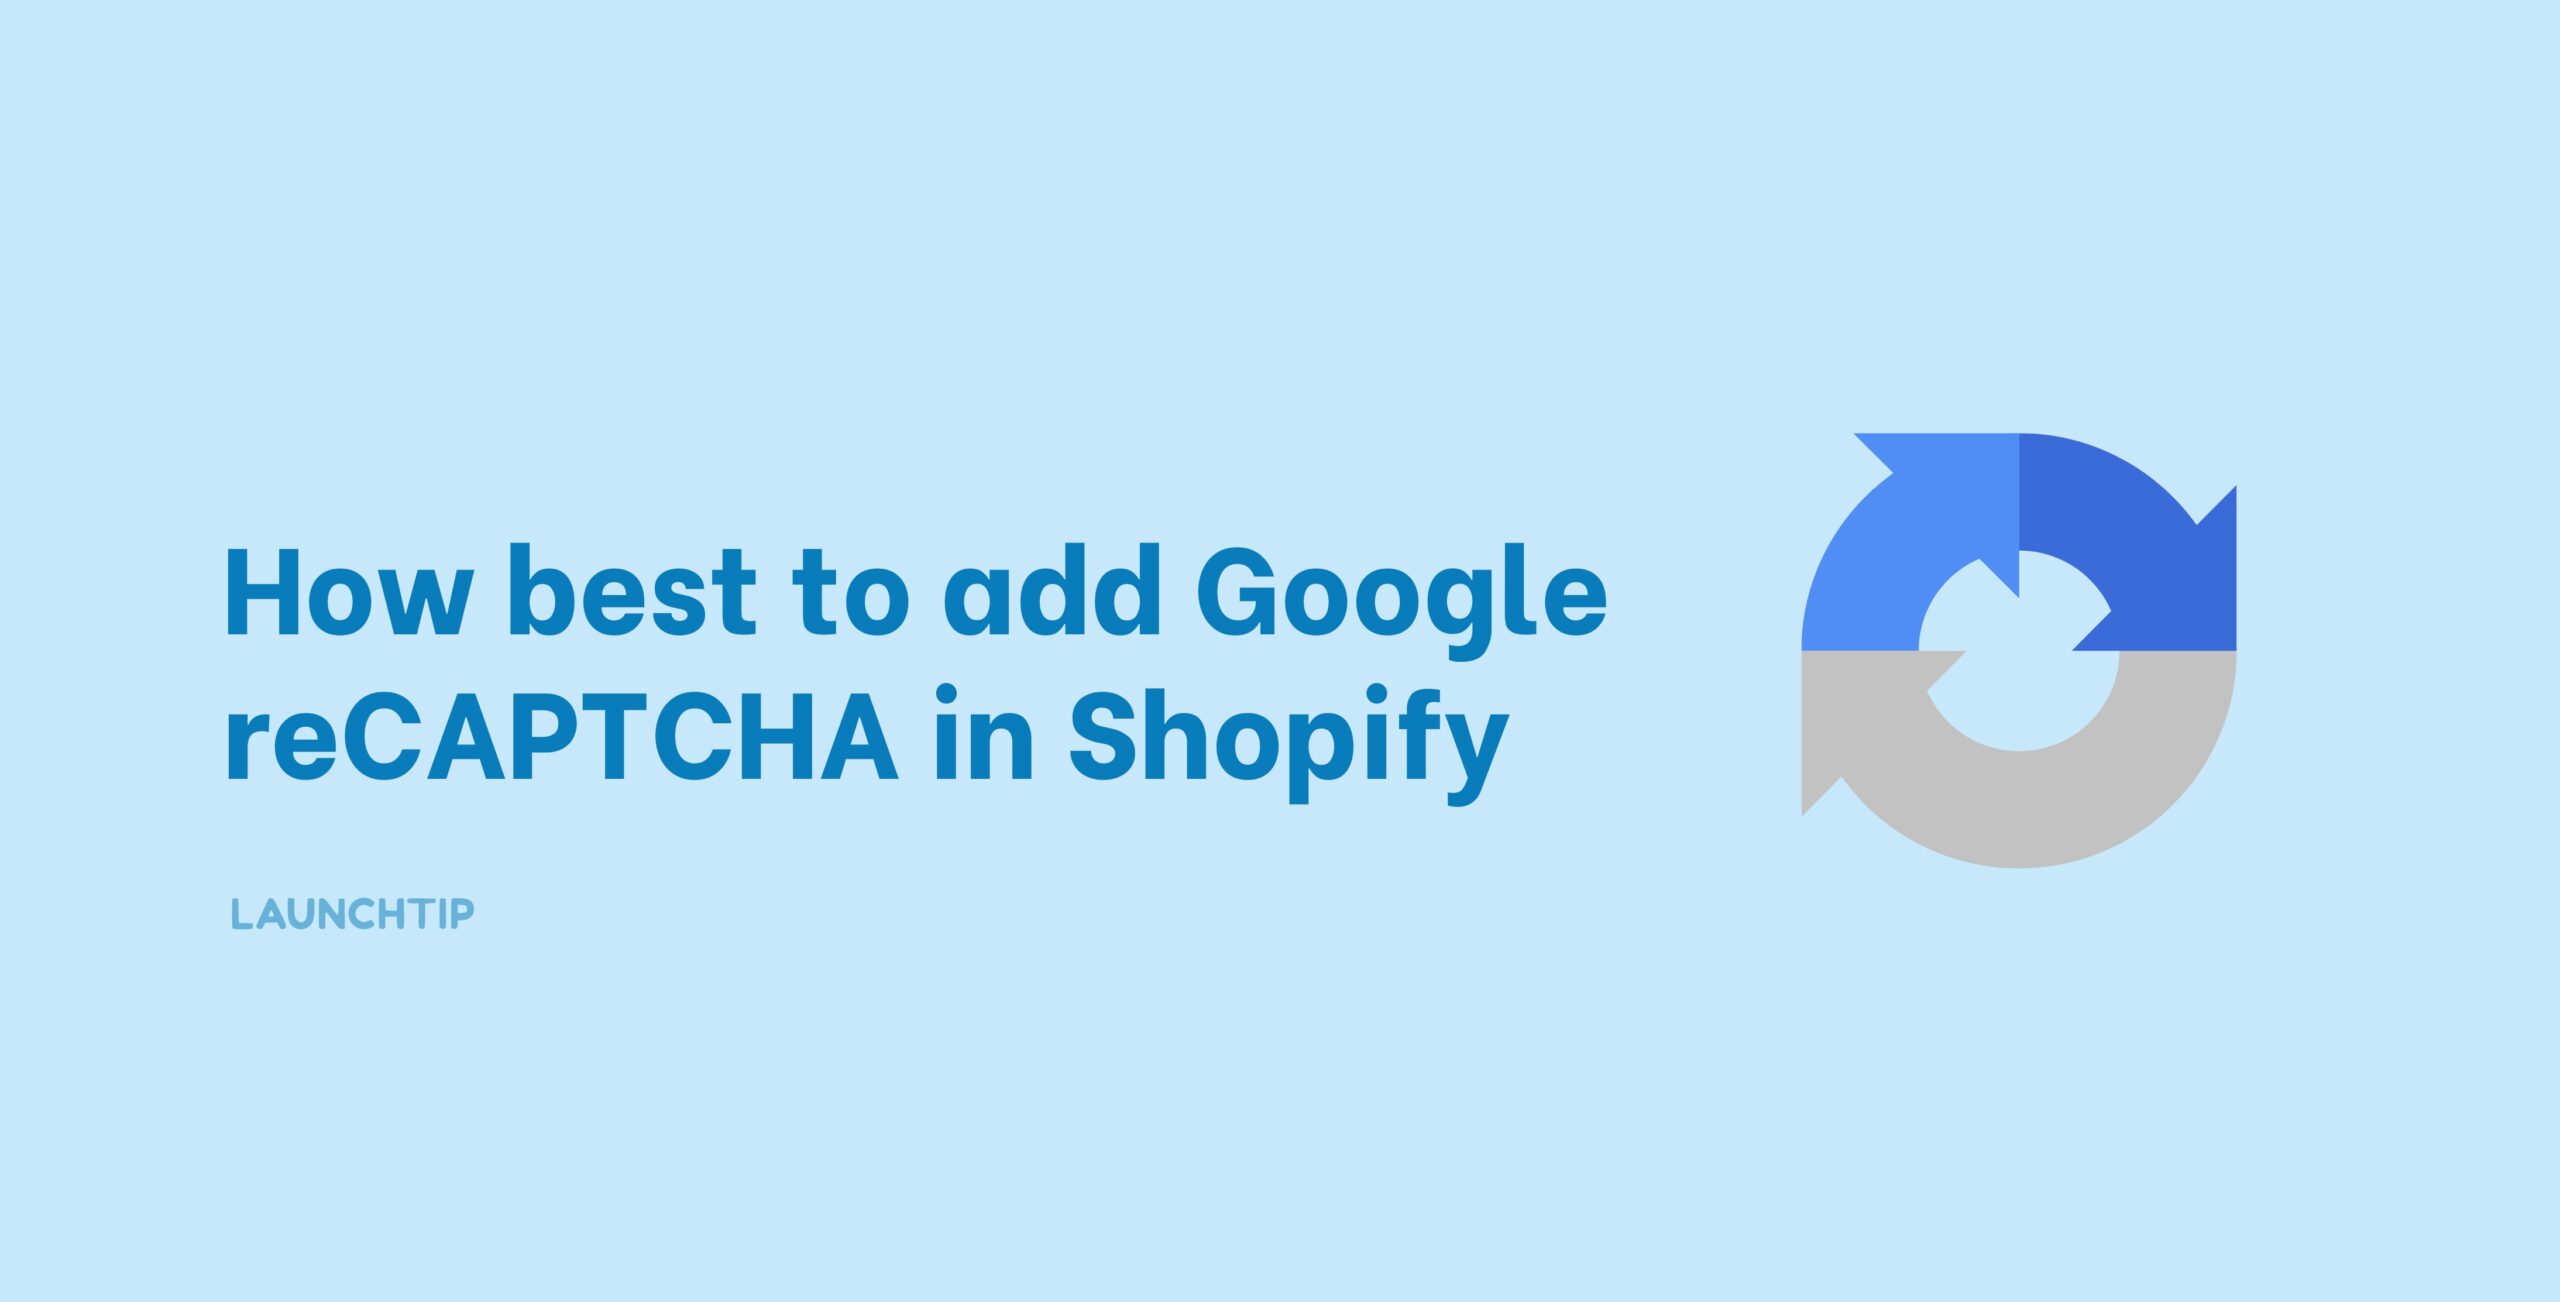 How best to add Google reCAPTCHA in Shopify